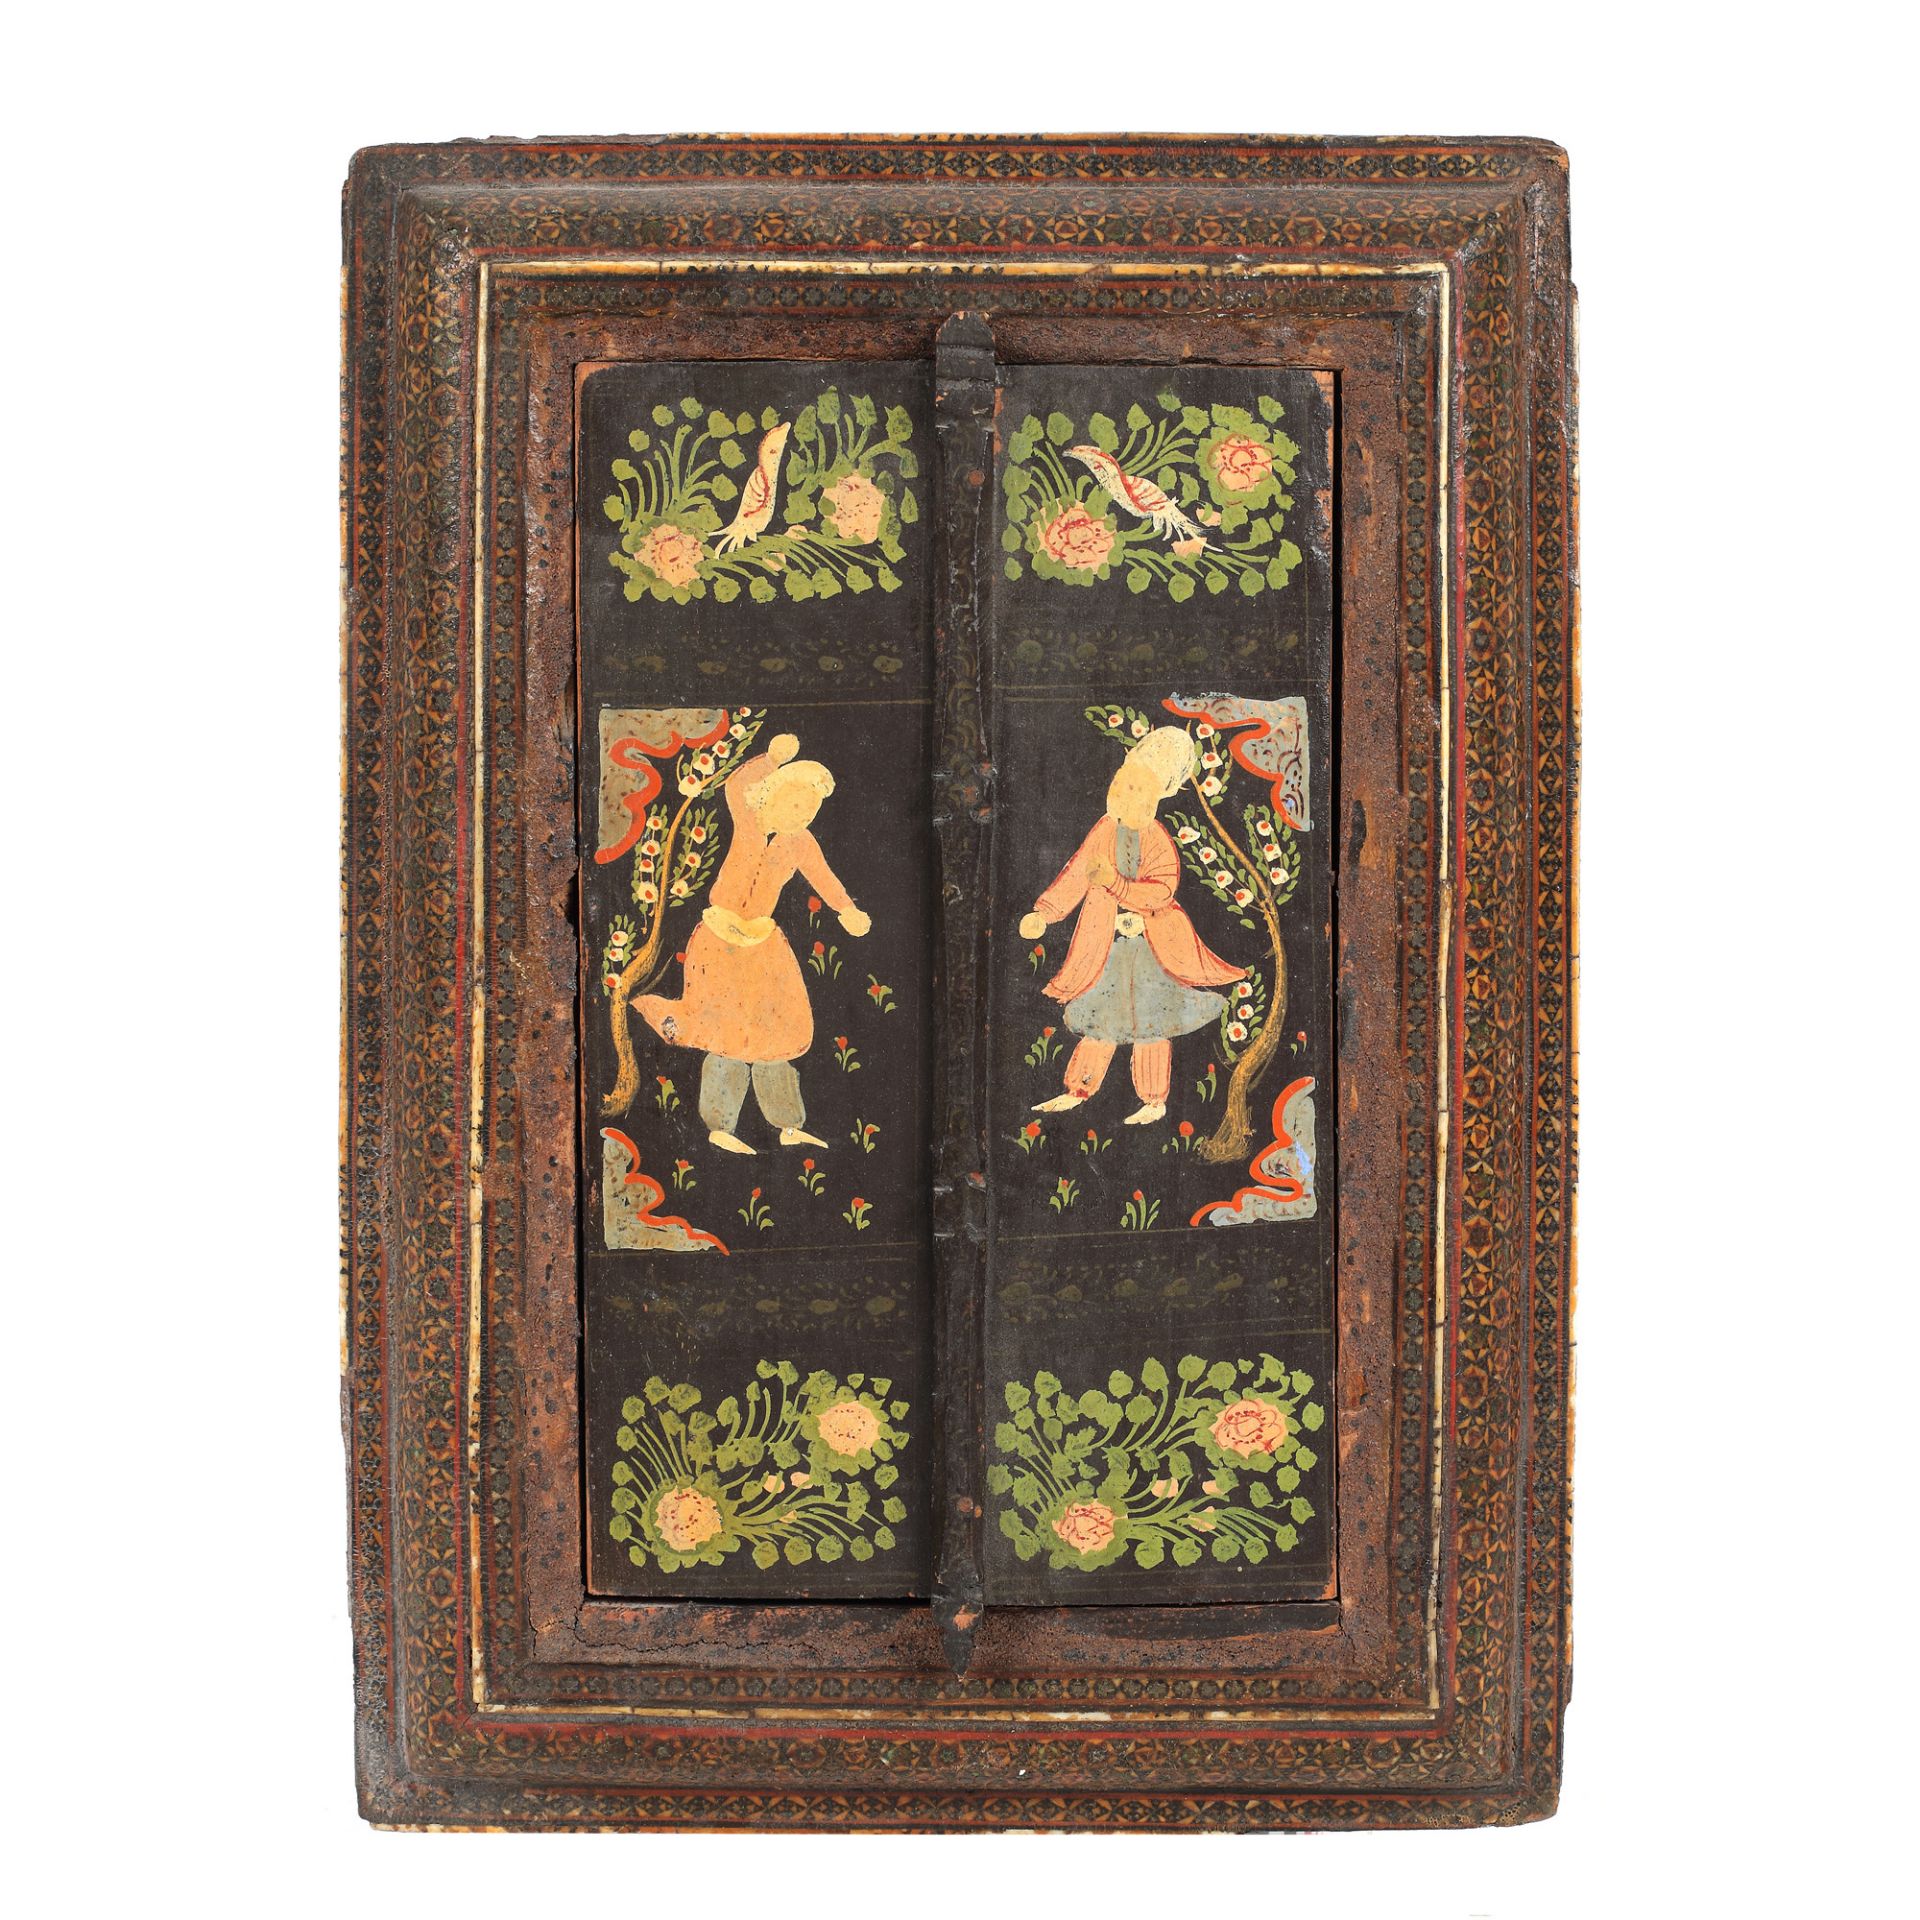 Carved and painted wooden mirror, decorated with traditional motifs, India, early 20th century